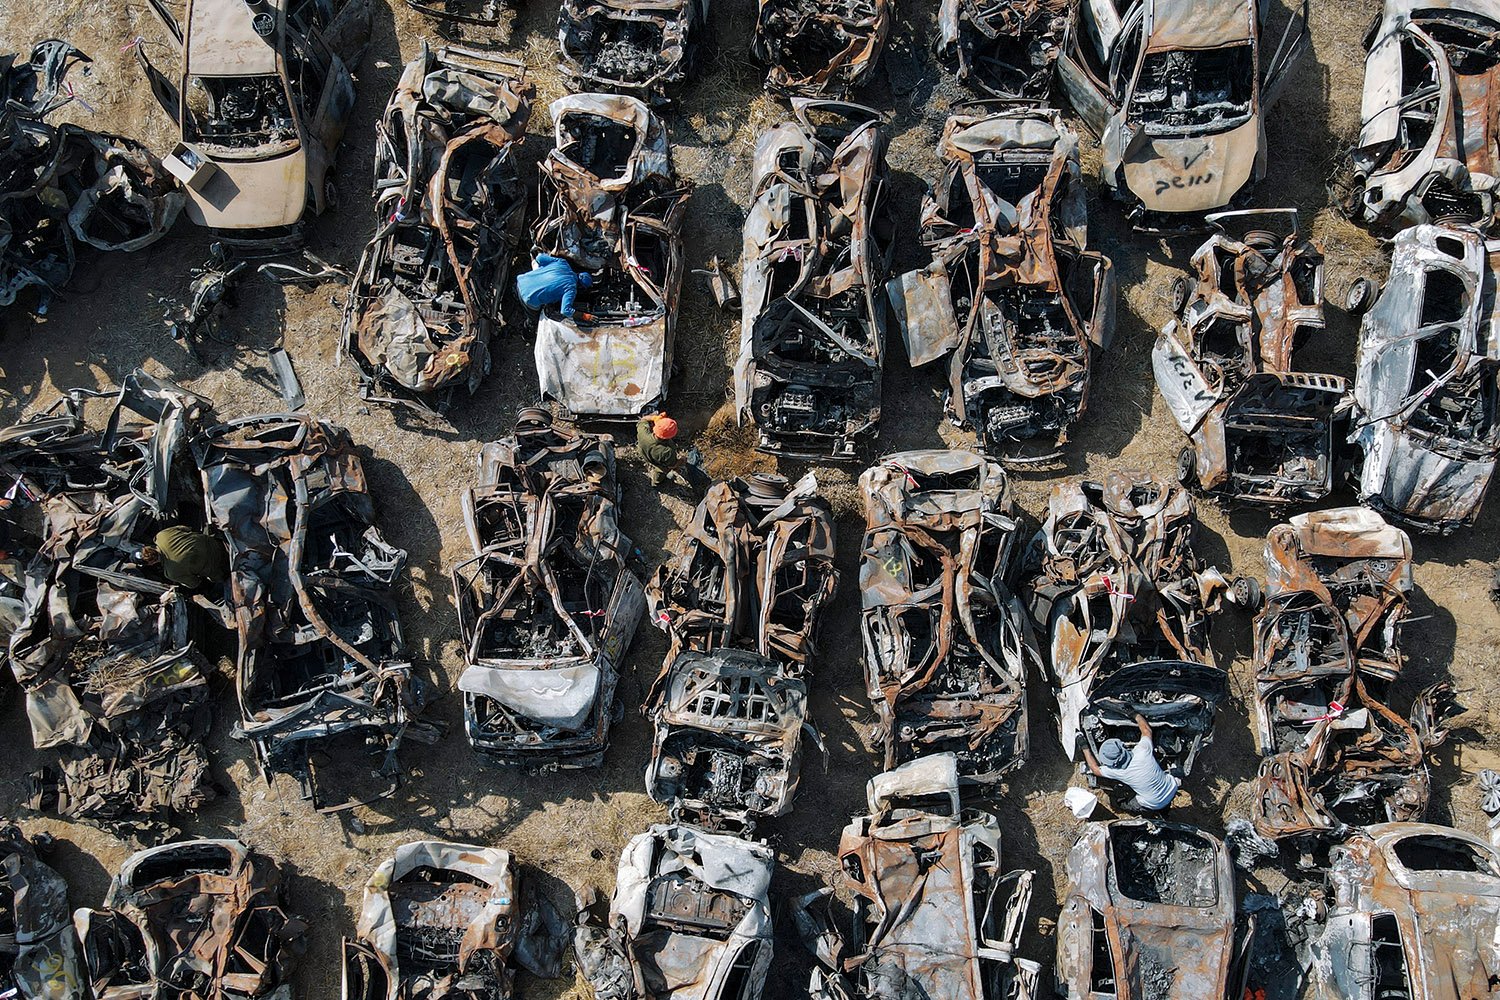  Israeli security forces inspect charred vehicles burned in the bloody Oct. 7 cross-border attack by Hamas militants, outside the town of Netivot, southern Israel. The vehicles were collected and placed in an area near the Gaza border after the attac